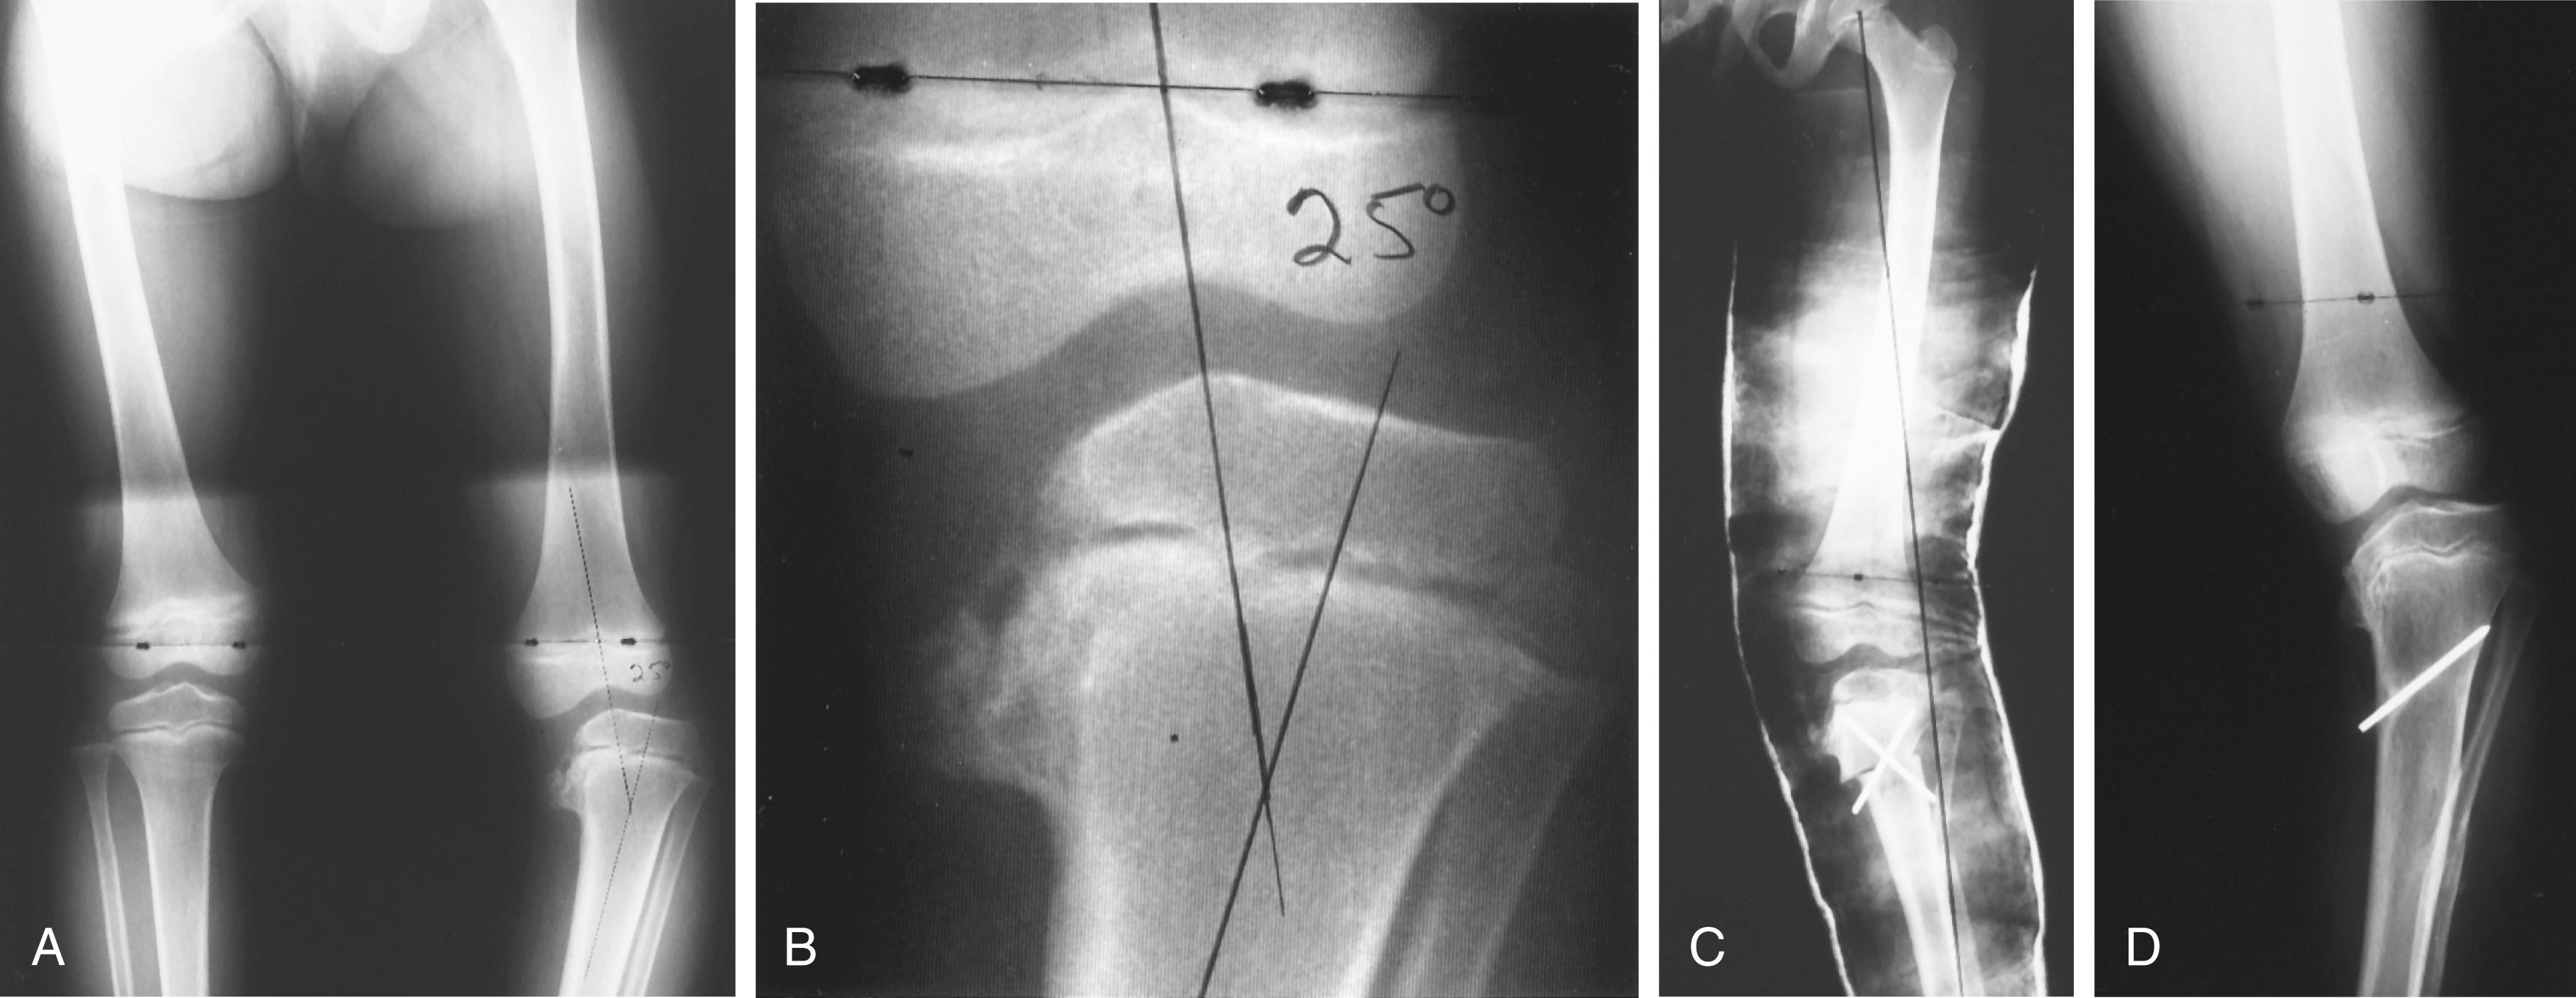 FIG. 18.20, (A) A 5-year-old black girl with a 25-degree varus deformity of the left leg. (B) Close-up view of a stage III lesion (absence of continuous epiphyseal bone sloping into the metaphyseal defect, although the lesion is progressing toward stage IV; see Fig. 18.18 ). (C) Slight valgus overcorrection with lateralization of the mechanical axis produced by a high tibial osteotomy. (D) Radiograph obtained 2 years later showing obvious recurrence and medial physeal arrest (stage VI).